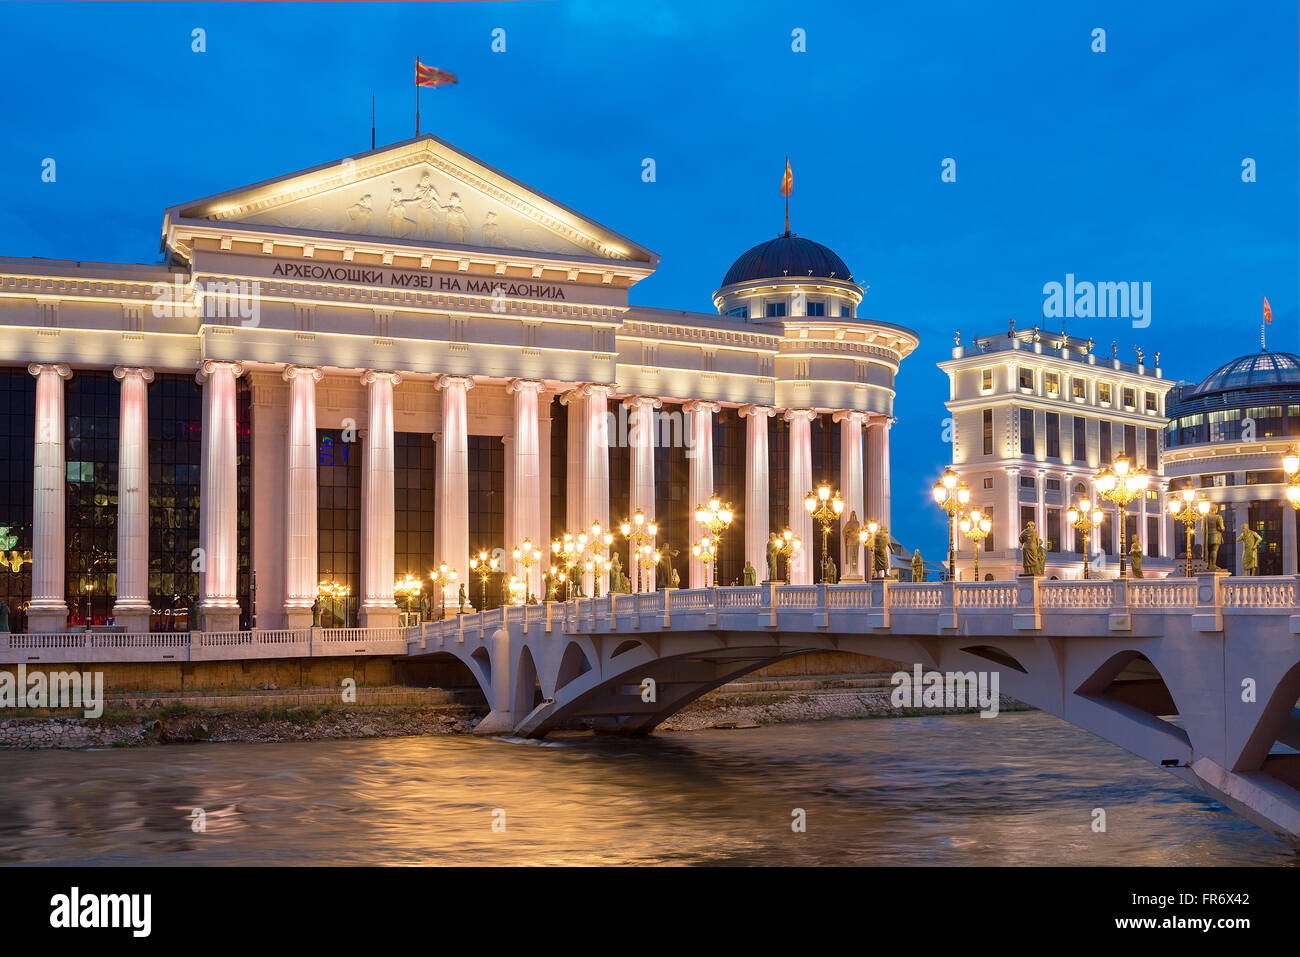 republic of Macedonia, Skopje, the Archeological Museum of Macedonia and the bridge of civilizations Stock Photo